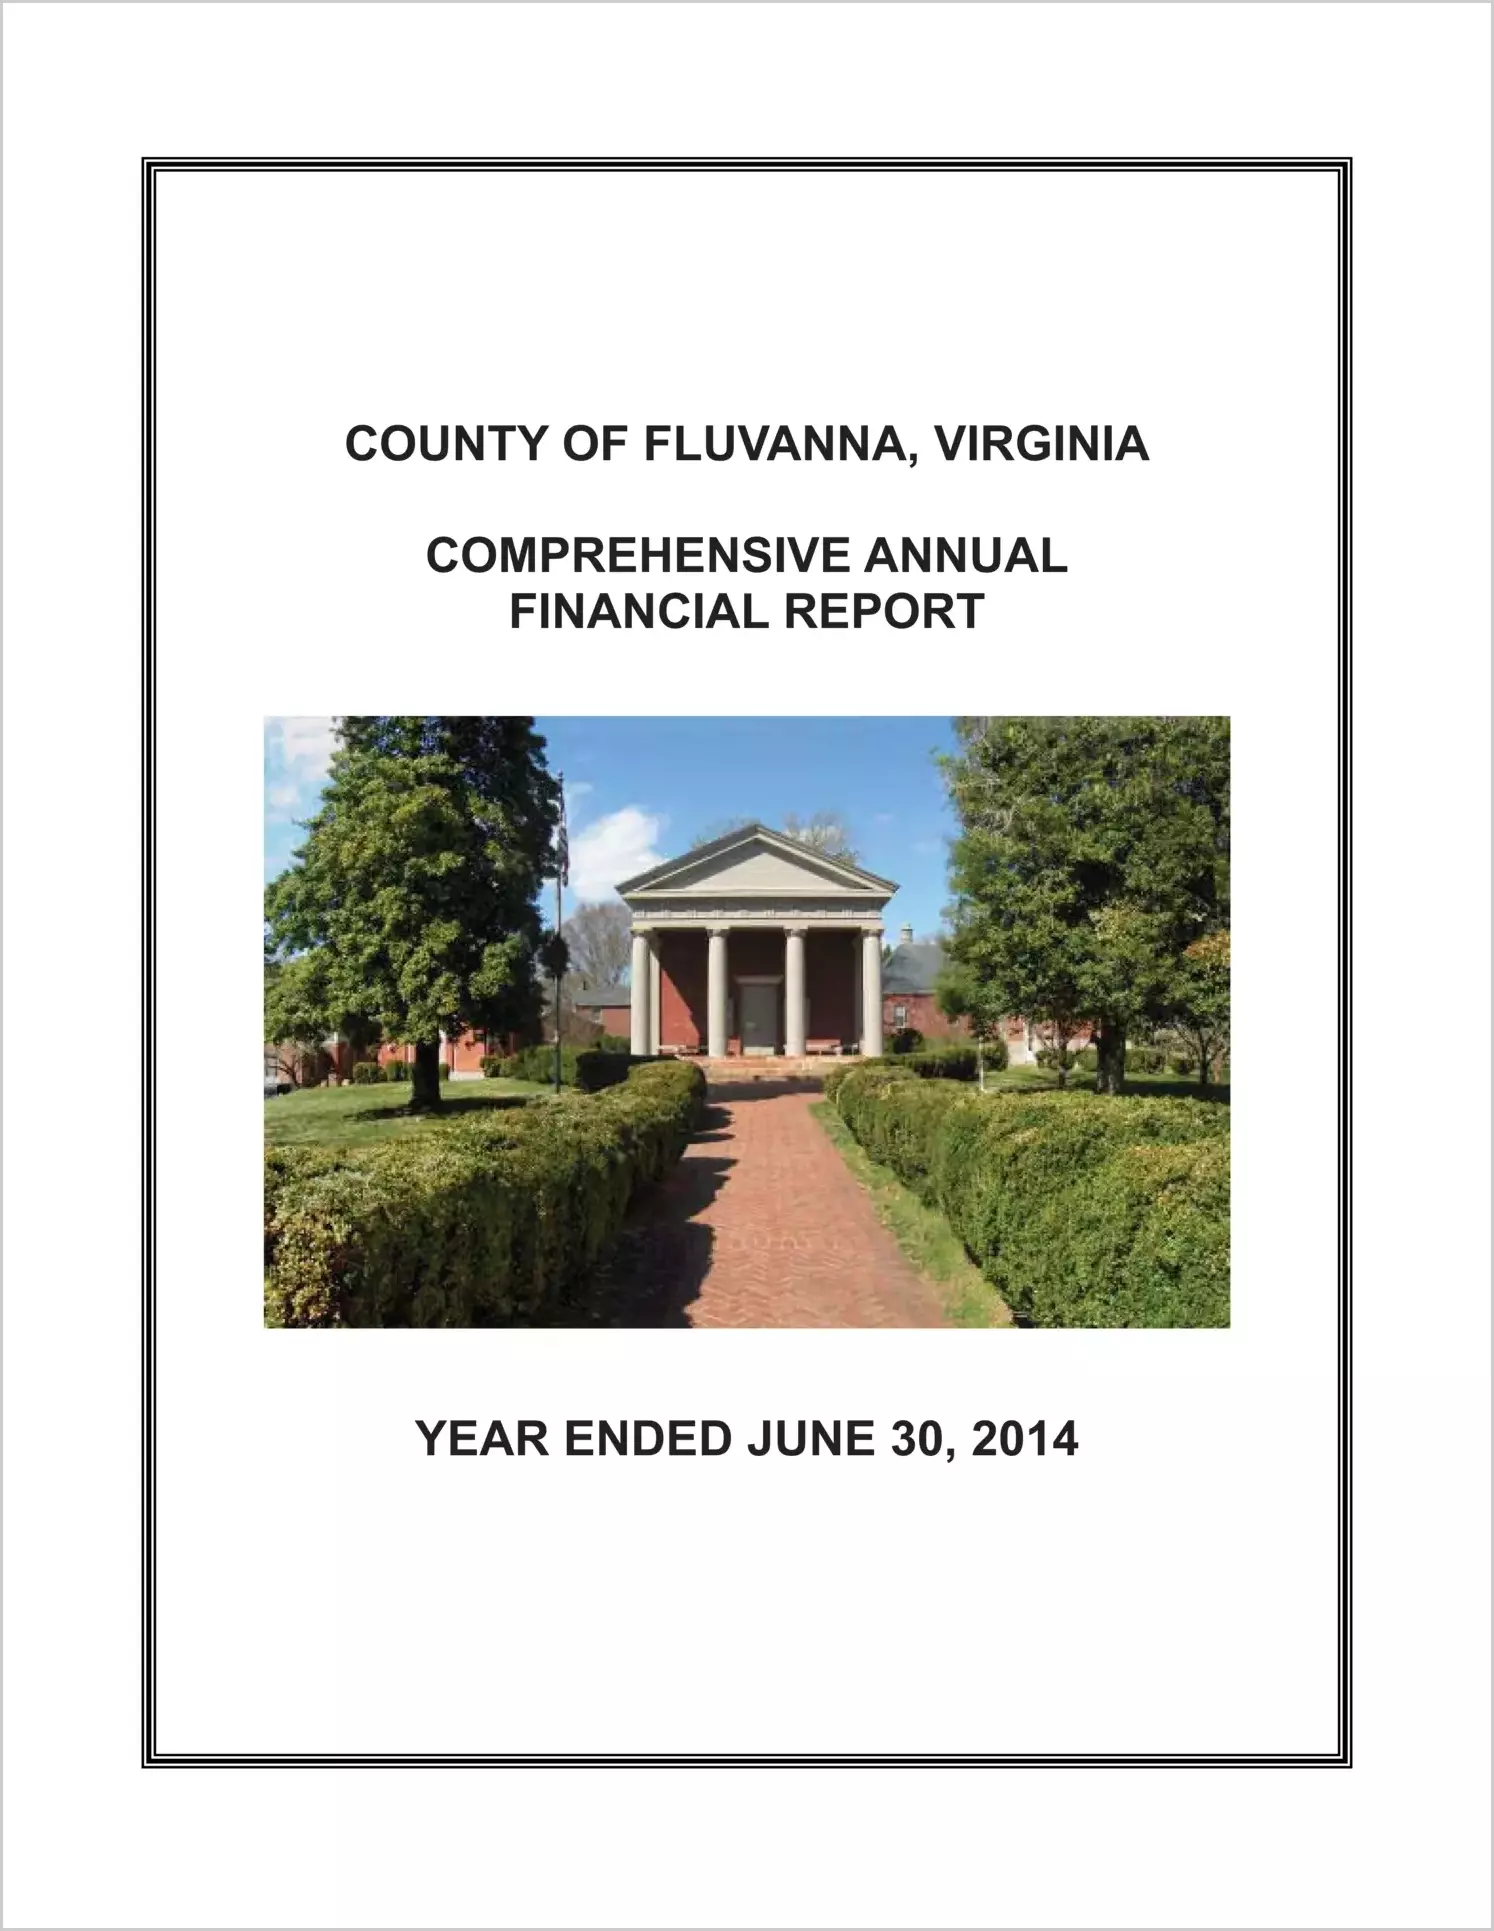 2014 Annual Financial Report for County of Fluvanna